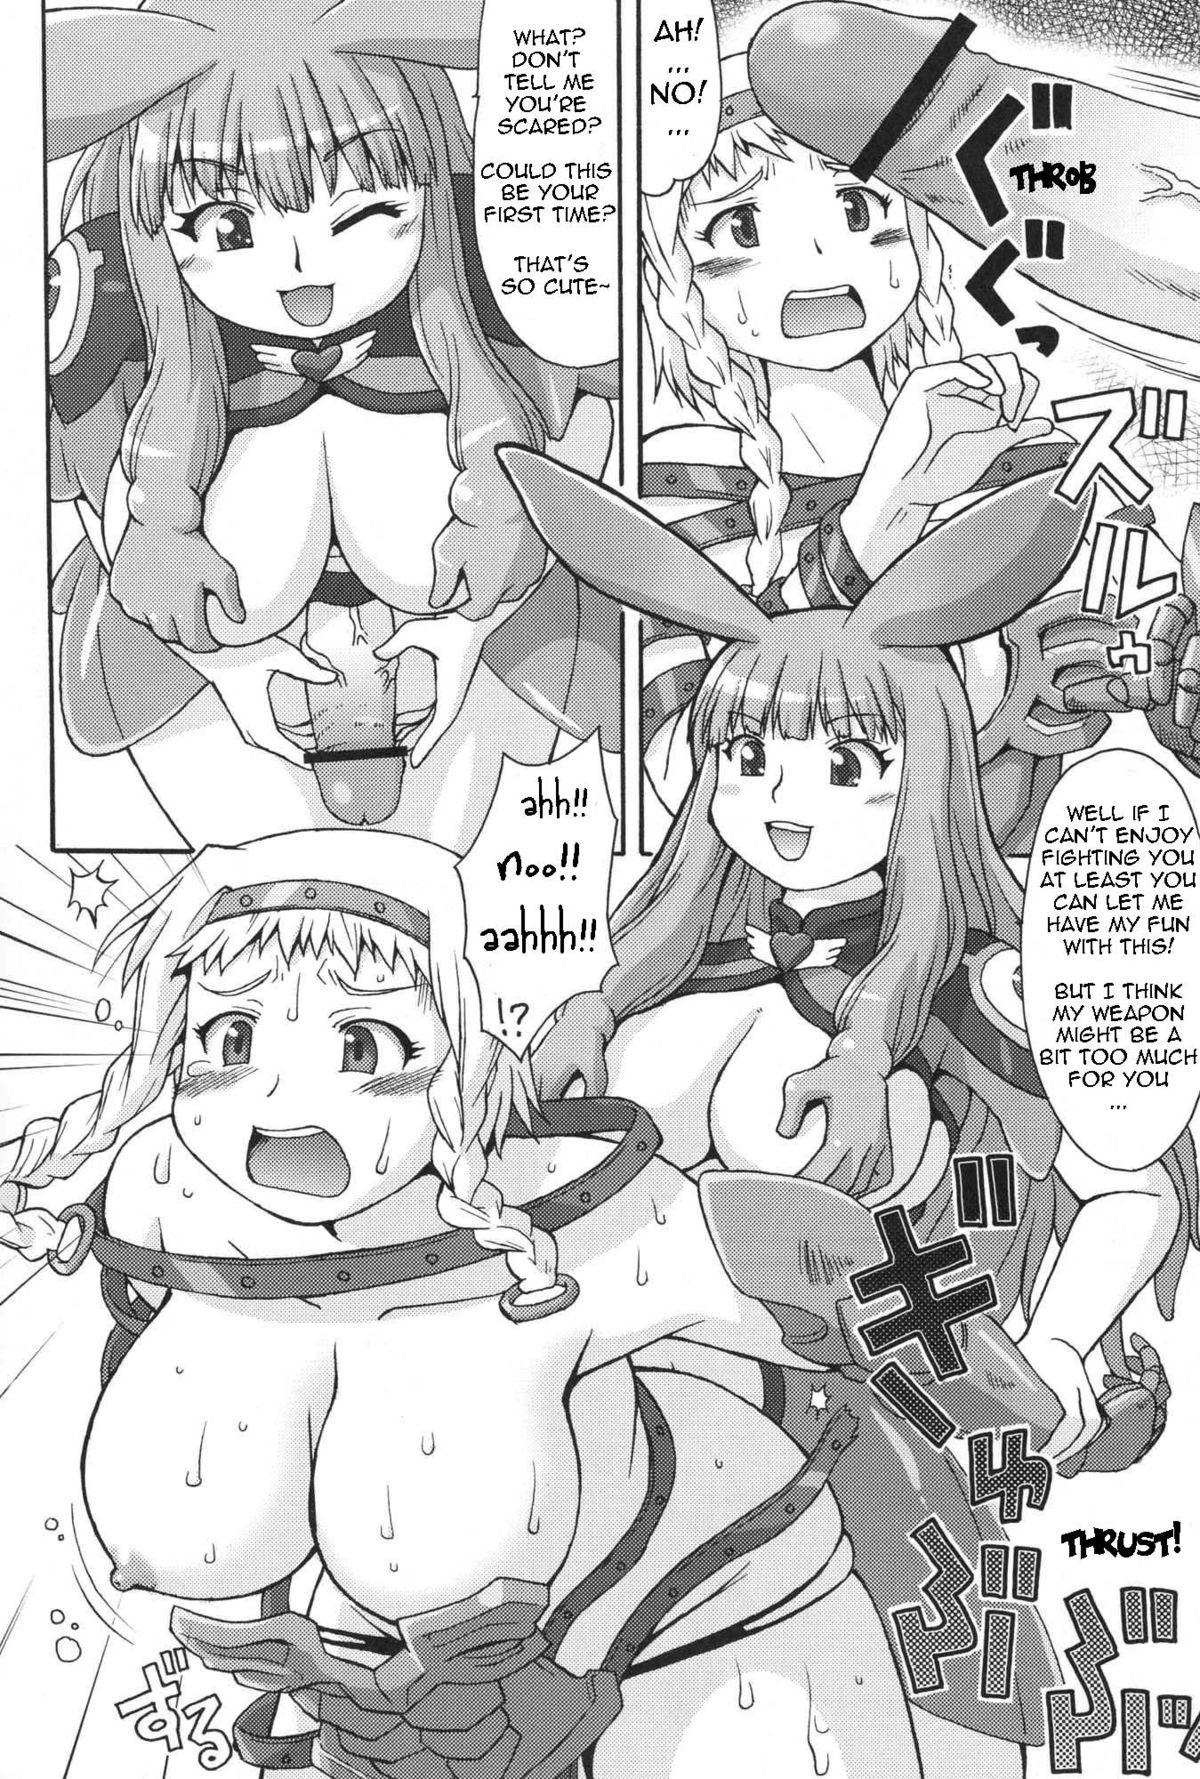 Smooth Mero Rin Queen - Queens blade Classy - Page 3